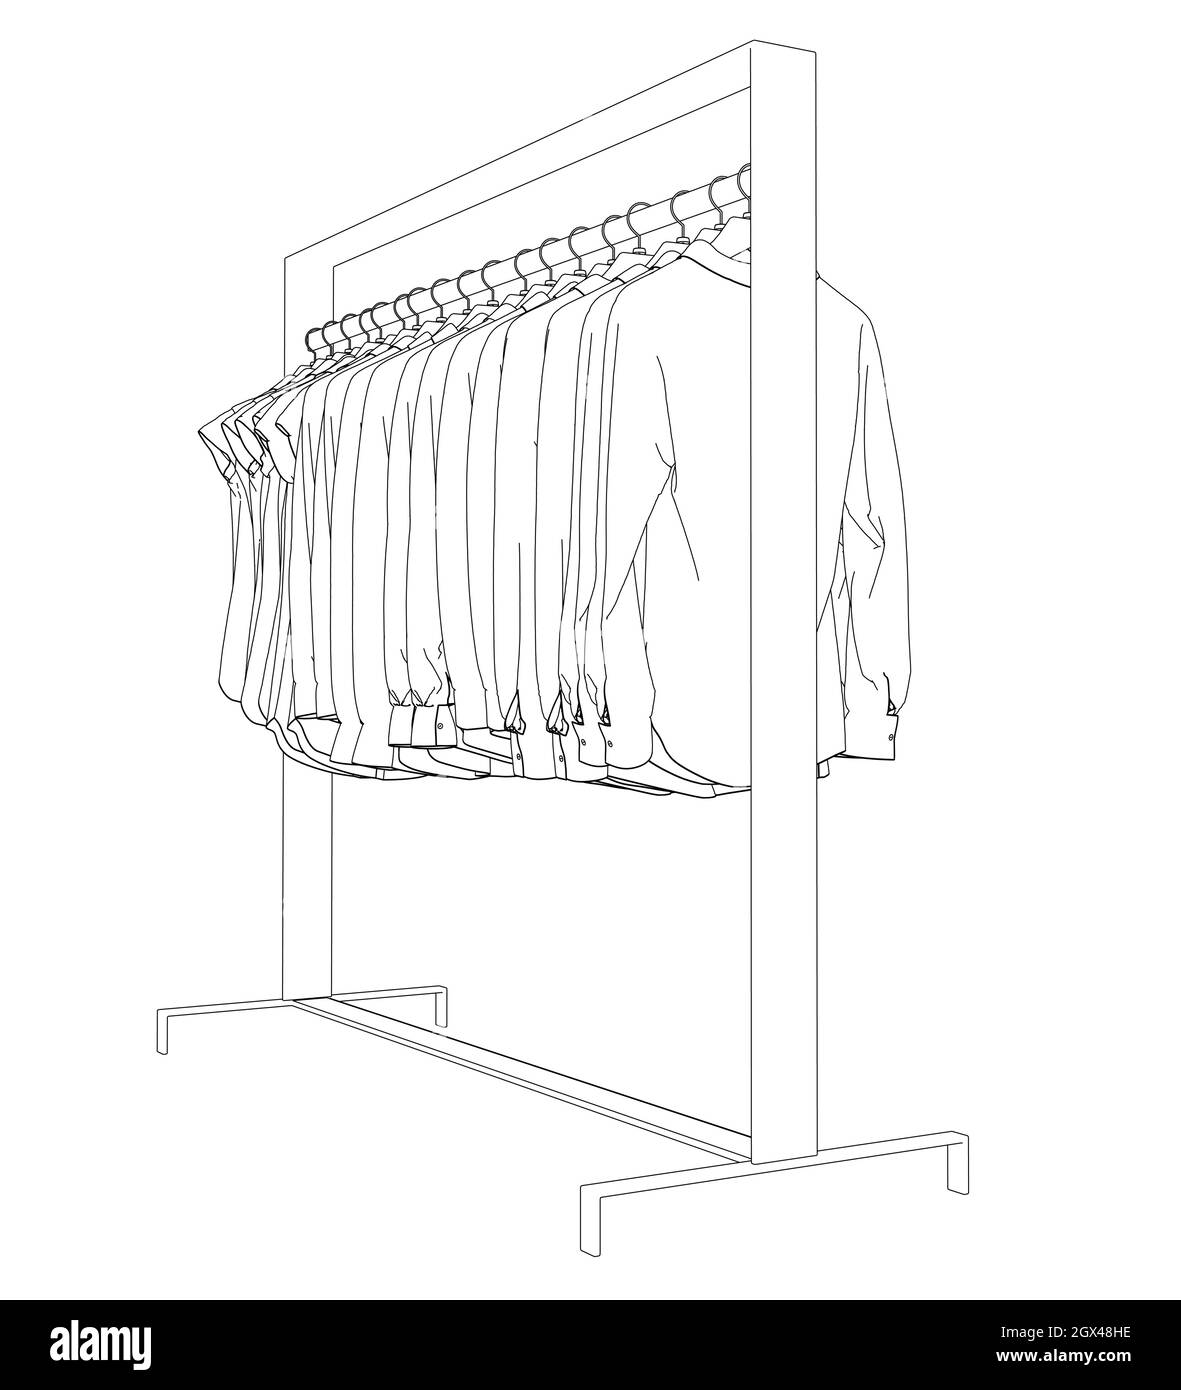 Outline of clothes hanging on a hanger isolated on white background ...